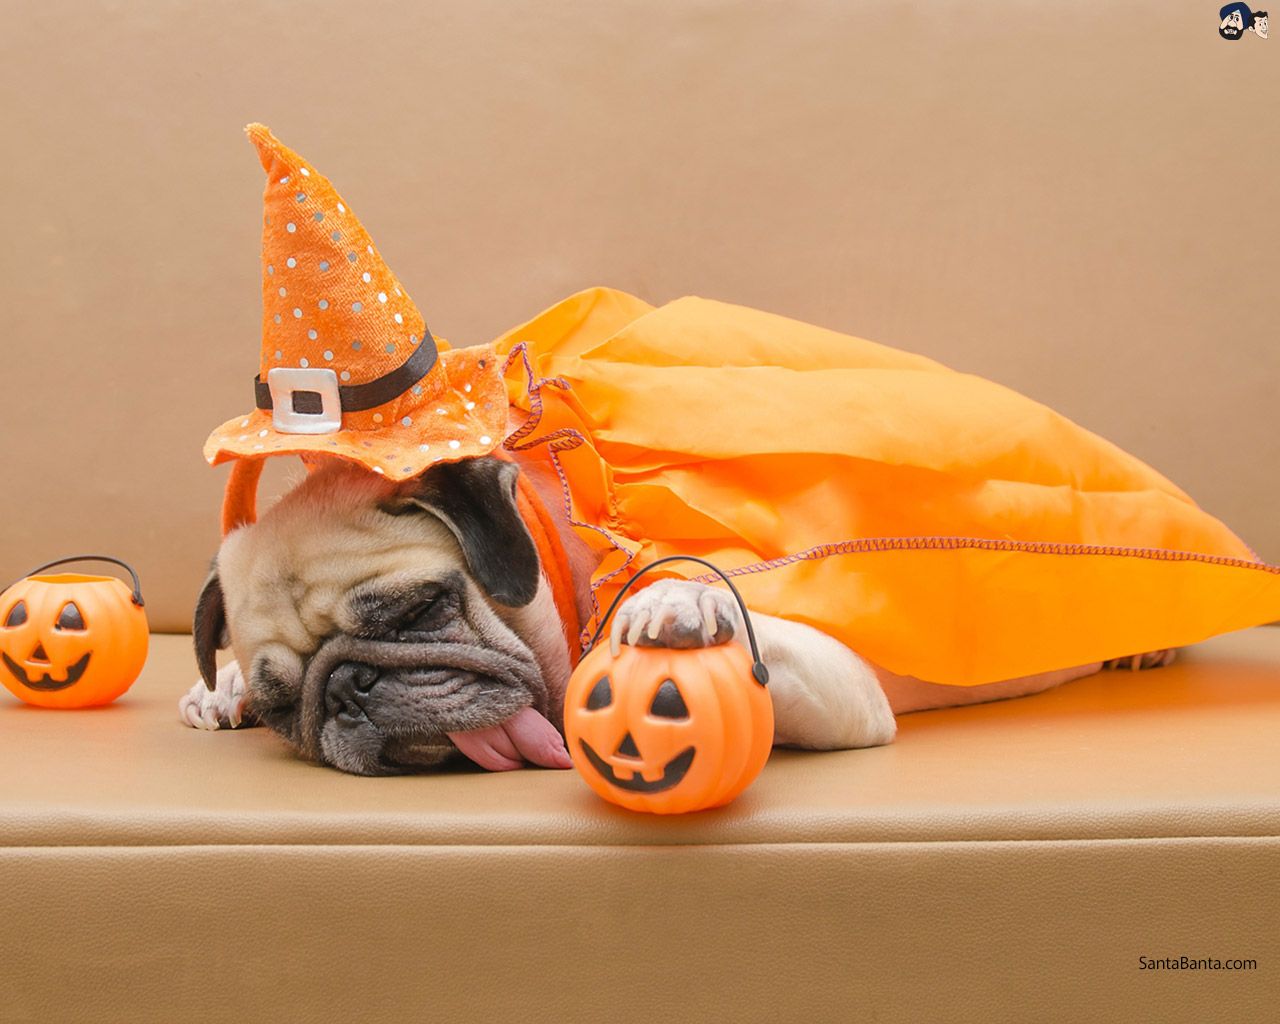 A dog dressed up for Halloween celebrations